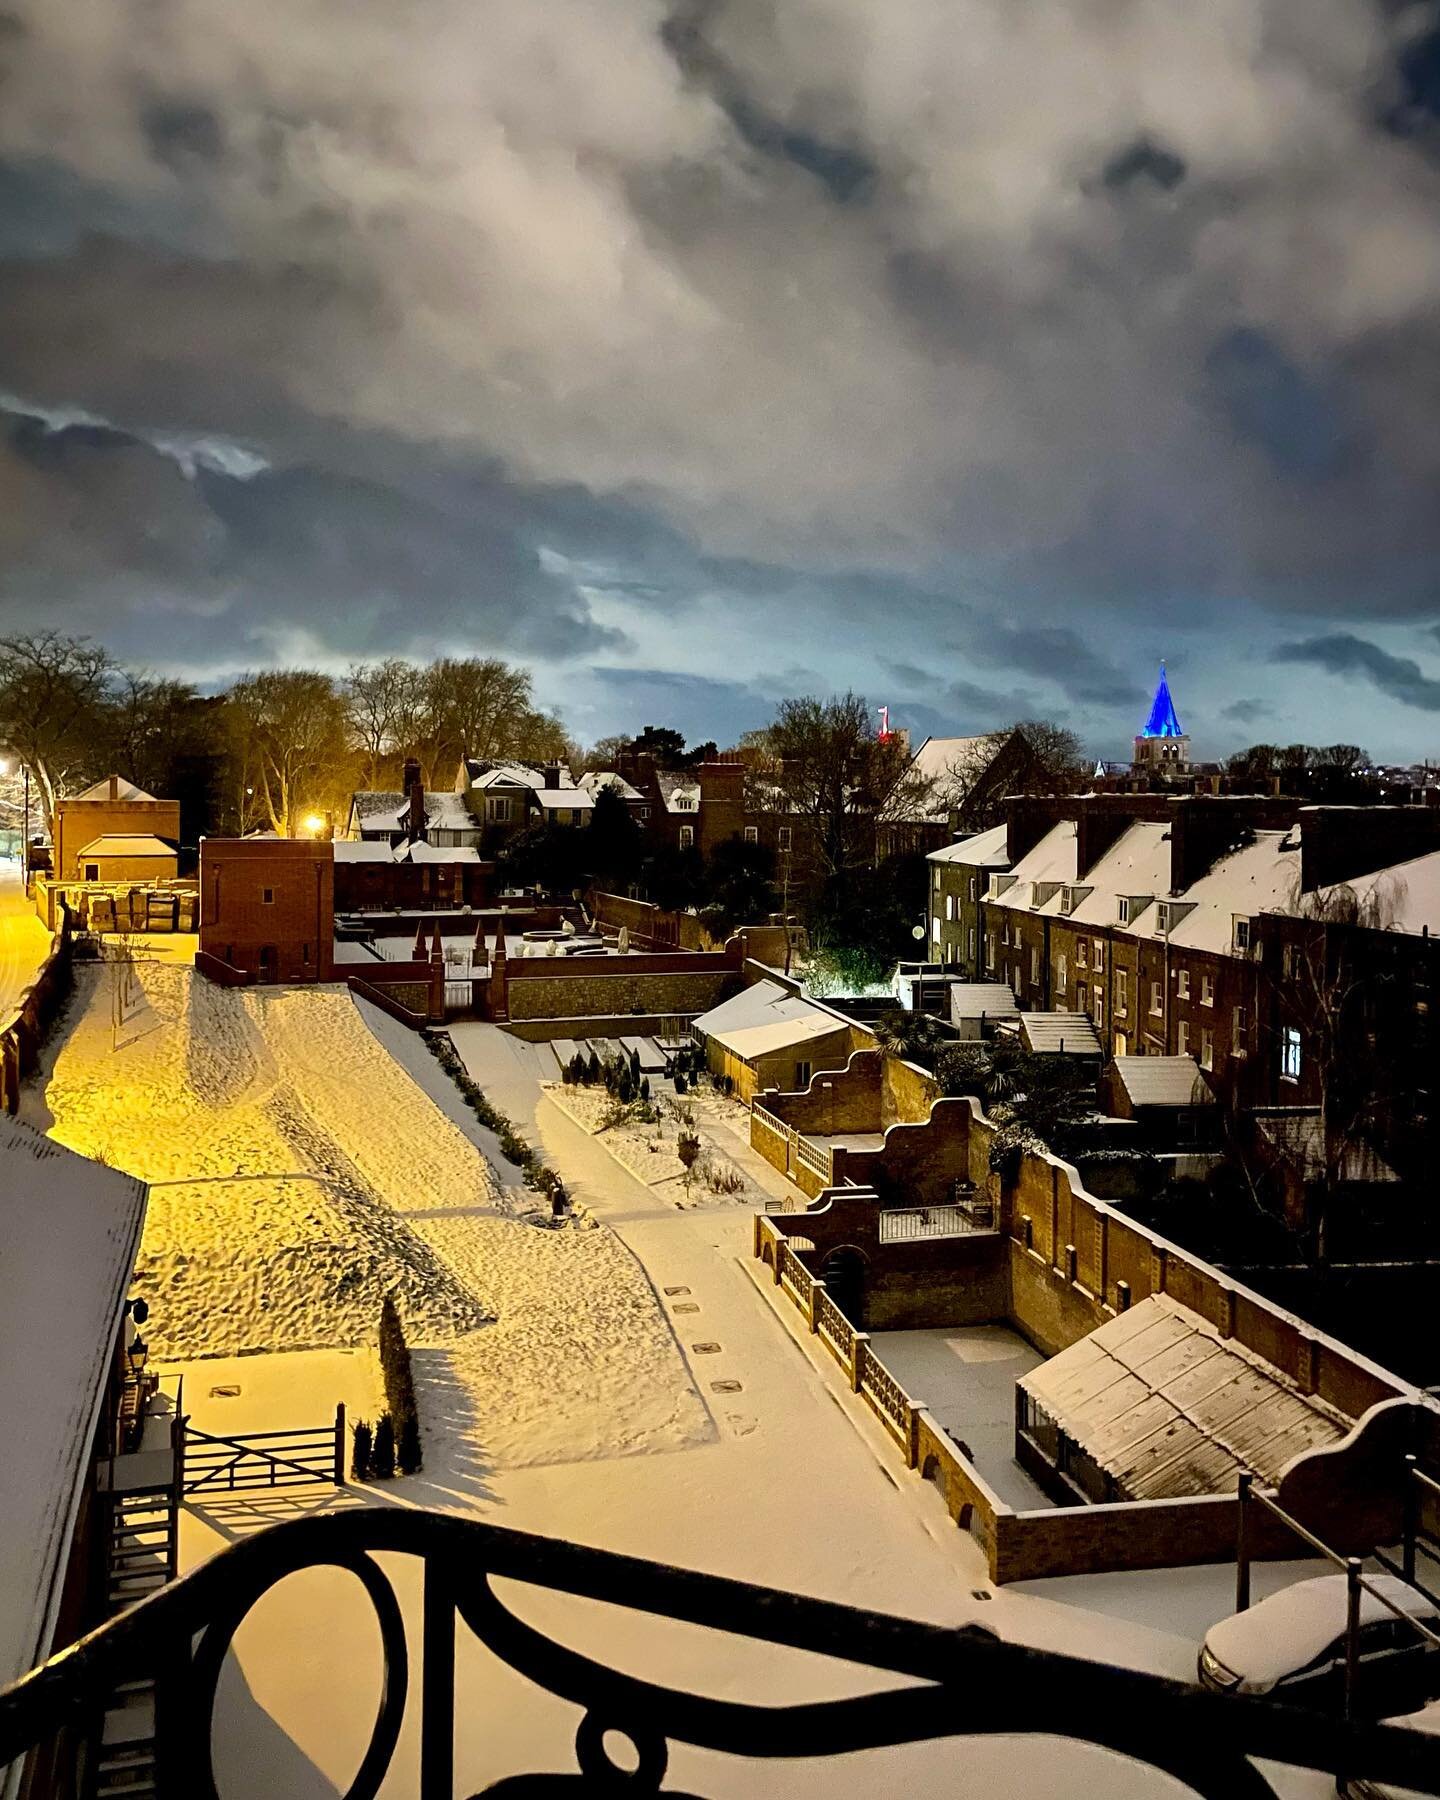 Magical winter view from the top balcony of the Tower. A truly peaceful snowy eve. ☃️

-
#brewery #uniquehomes #rochesteruk #design #designinspiration #interiordesign #interiorstyle #interiordesigntrends #interiordesigninspiration #architecture #inte